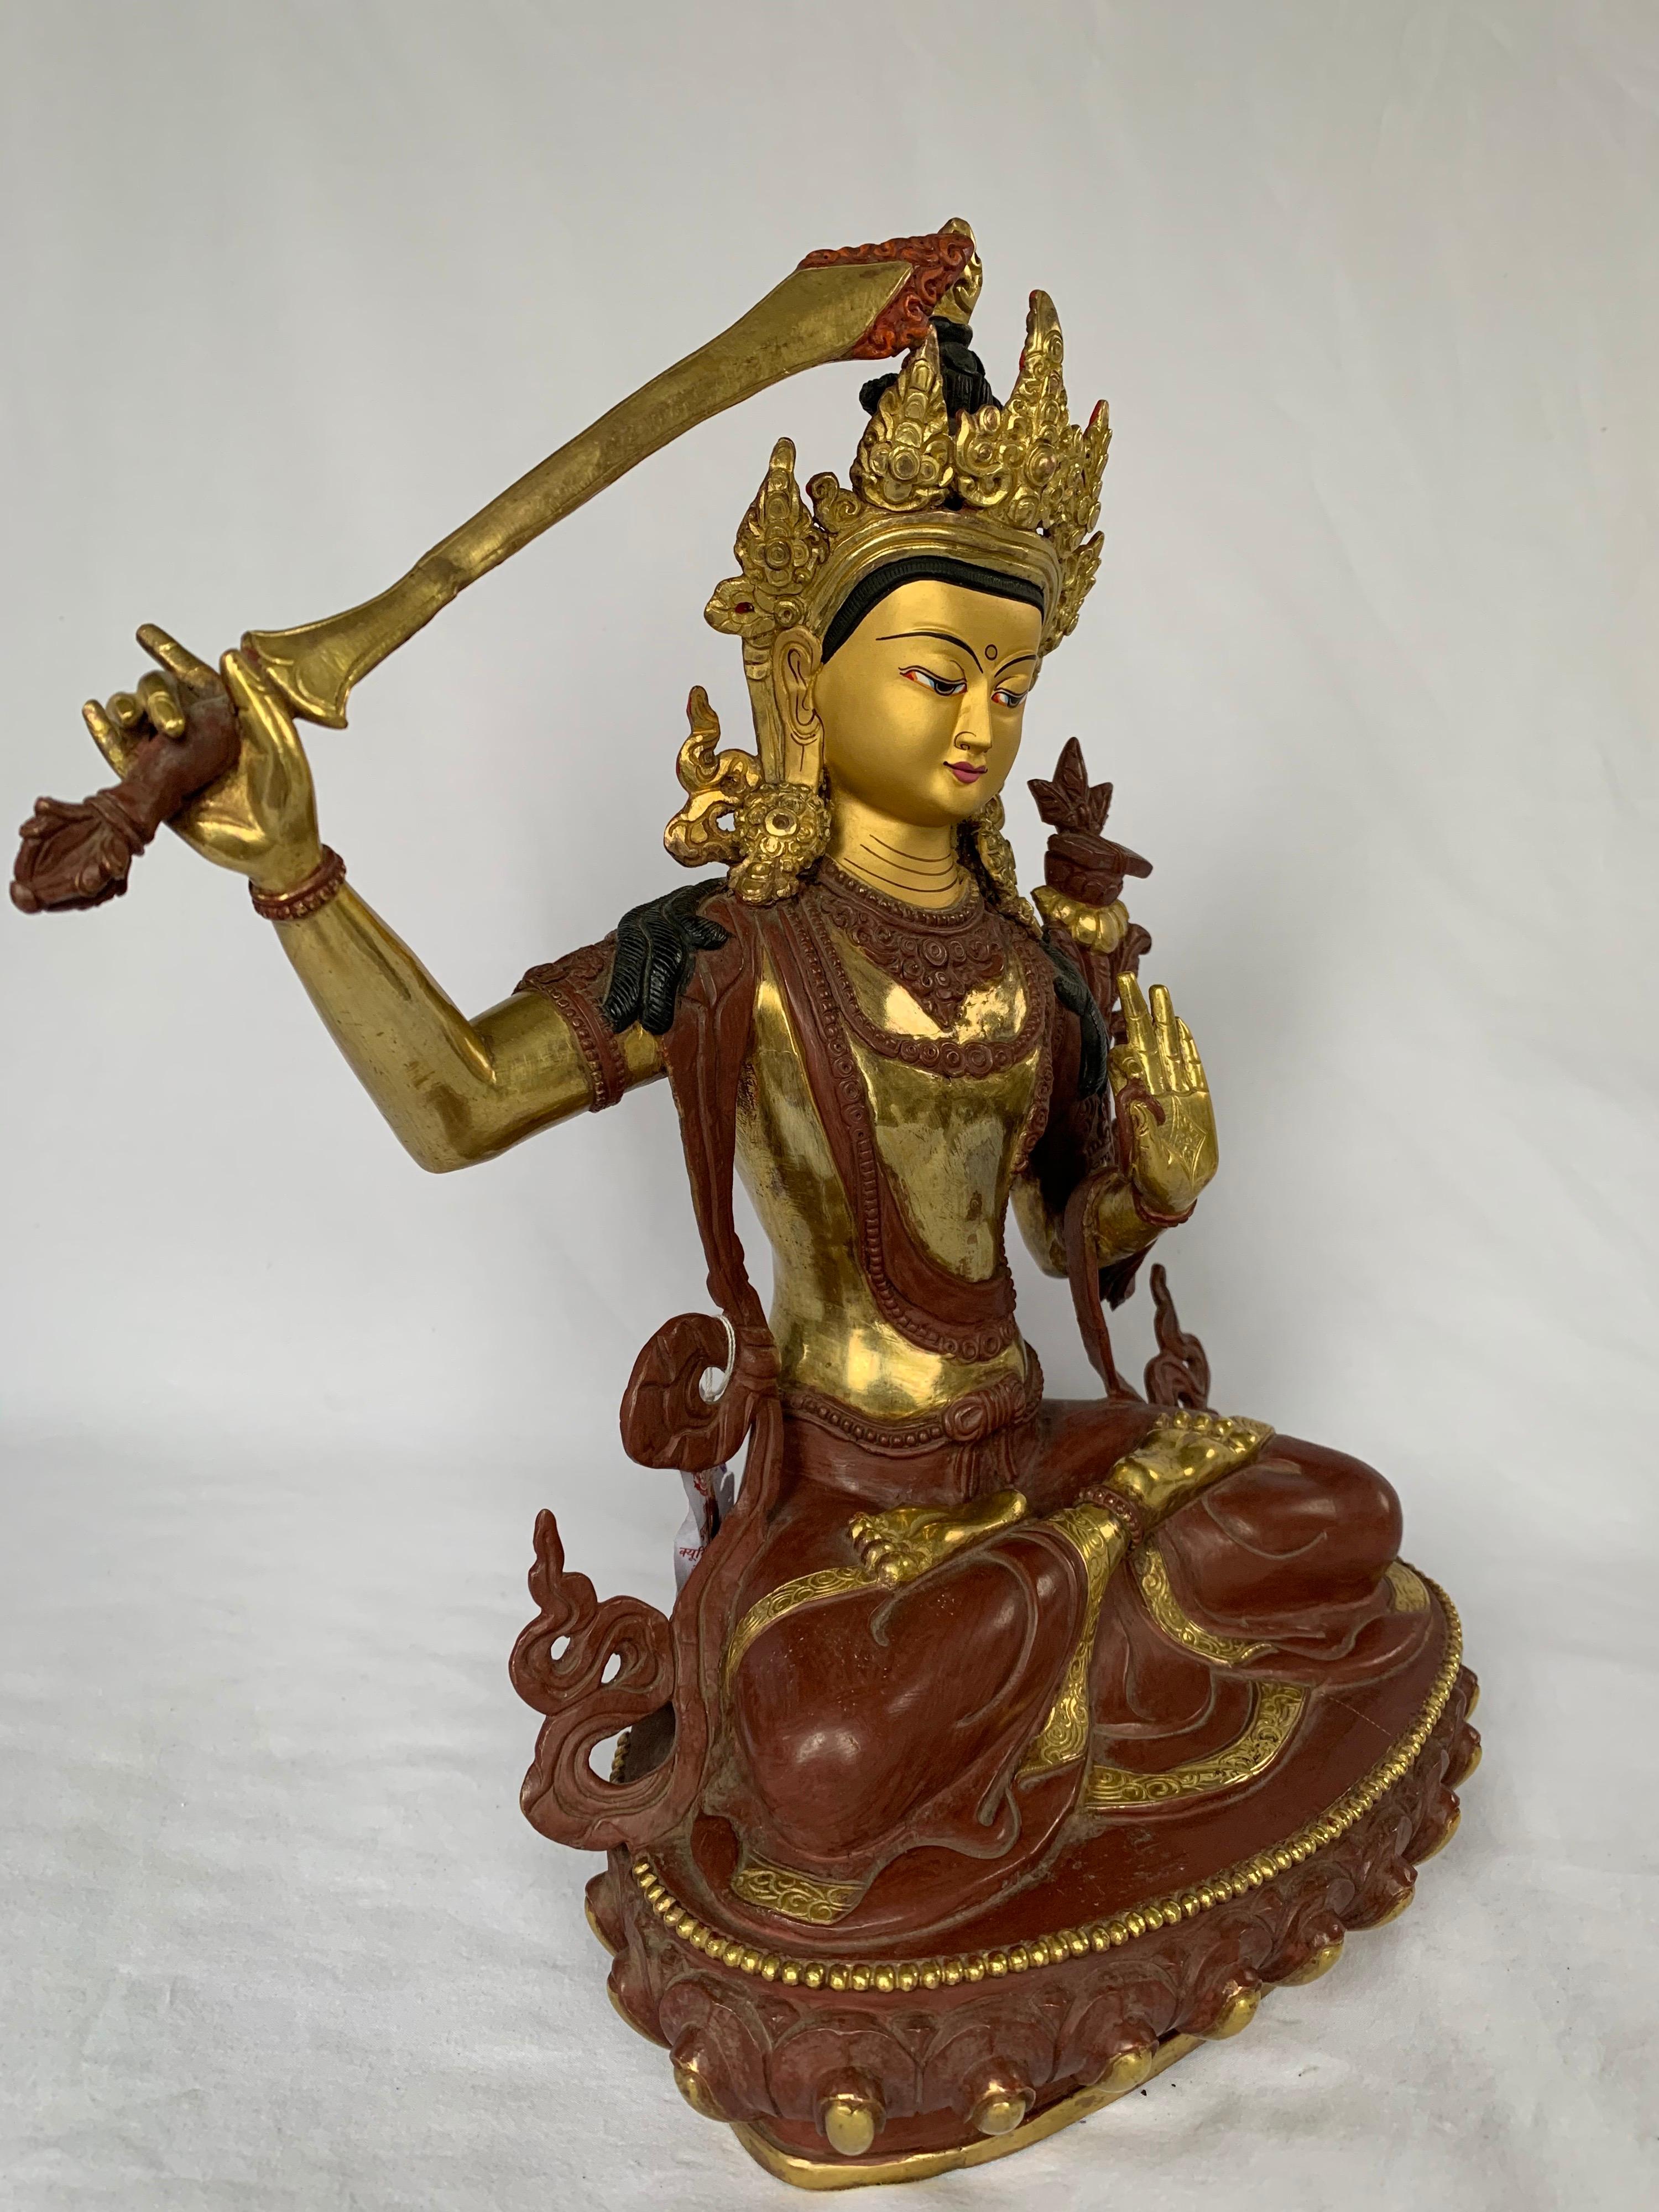 Manjushree Statue 12 Inch with 24K Gold Handcrafted by Lost Wax Process - Other Art Style Sculpture by Unknown